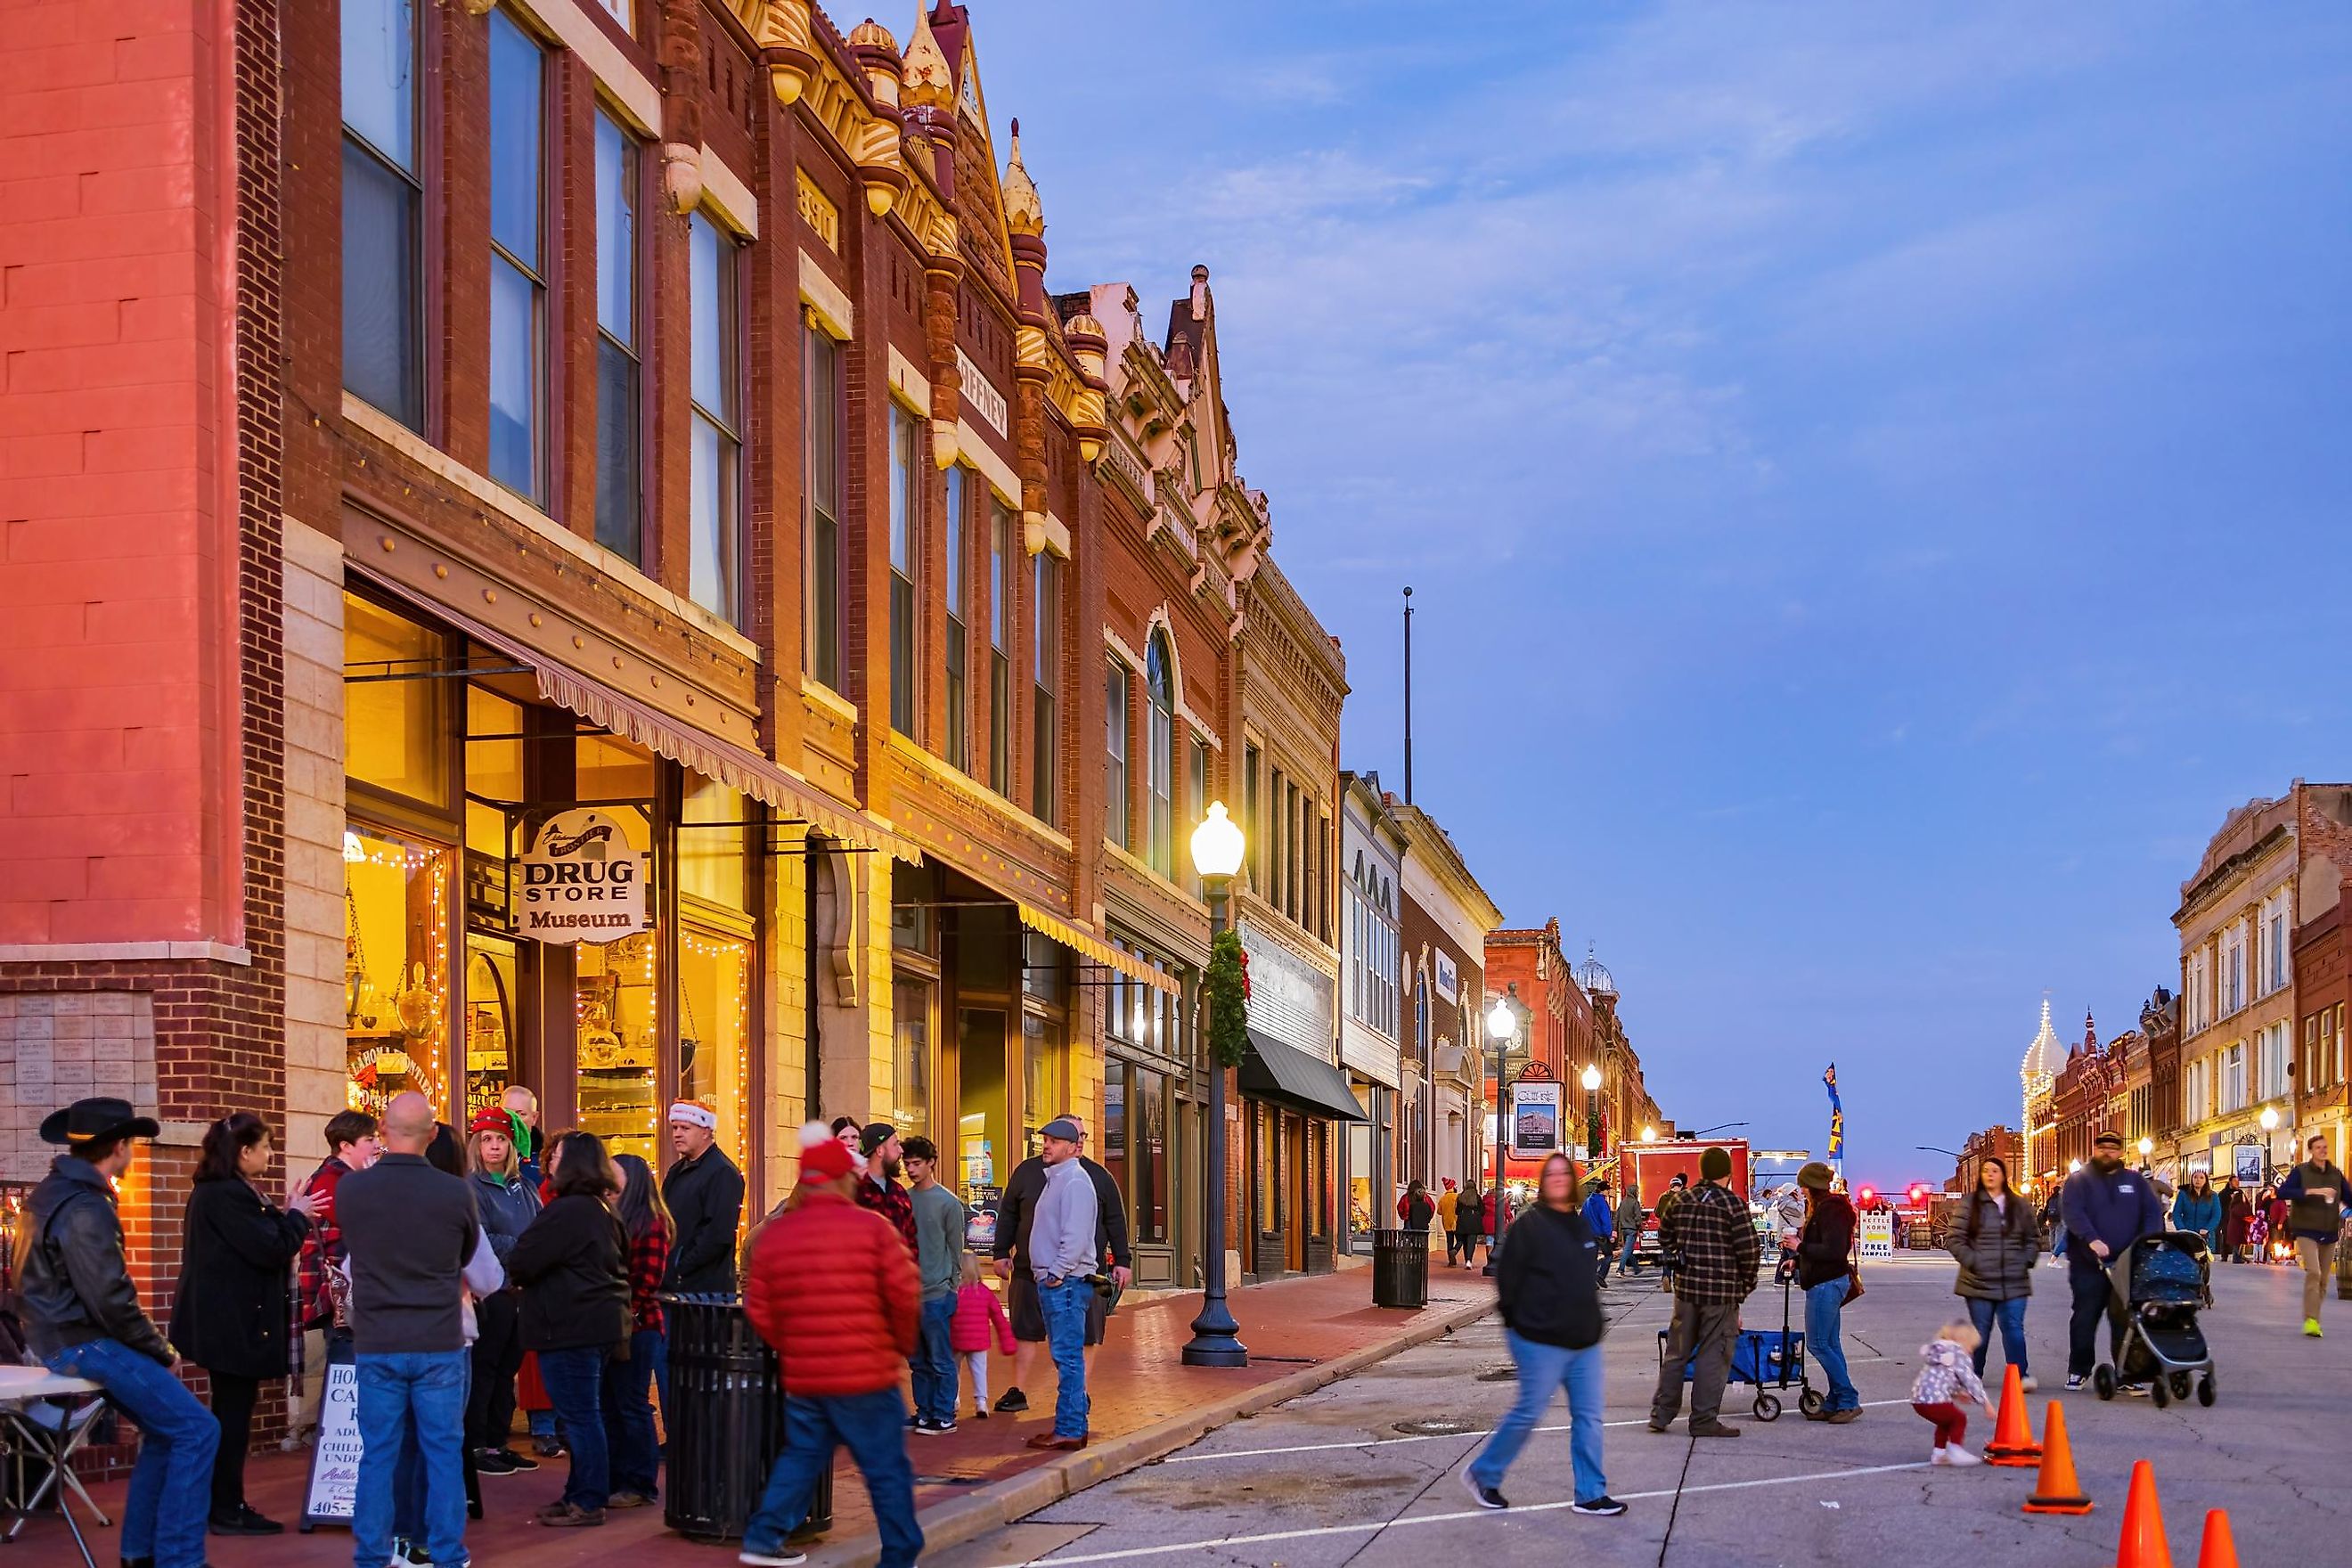 Night view of the famous Guthrie Victorian Walk in Oklahoma. Editorial credit: Kit Leong / Shutterstock.com